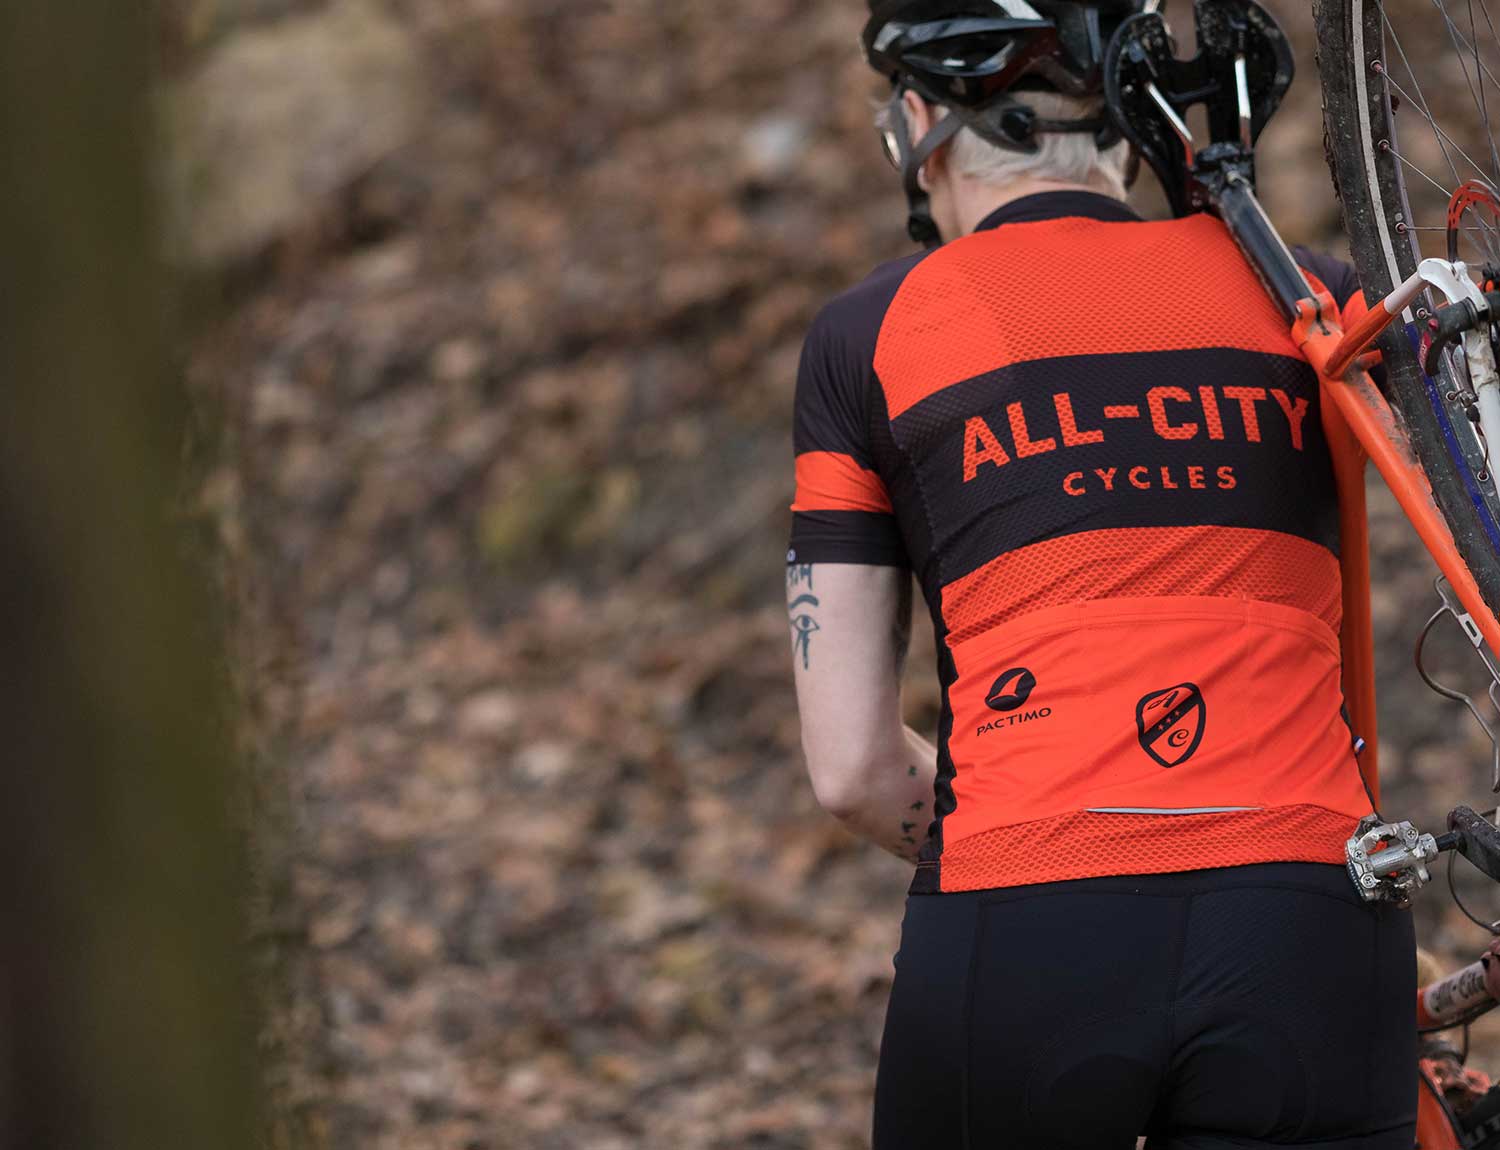 all city jersey